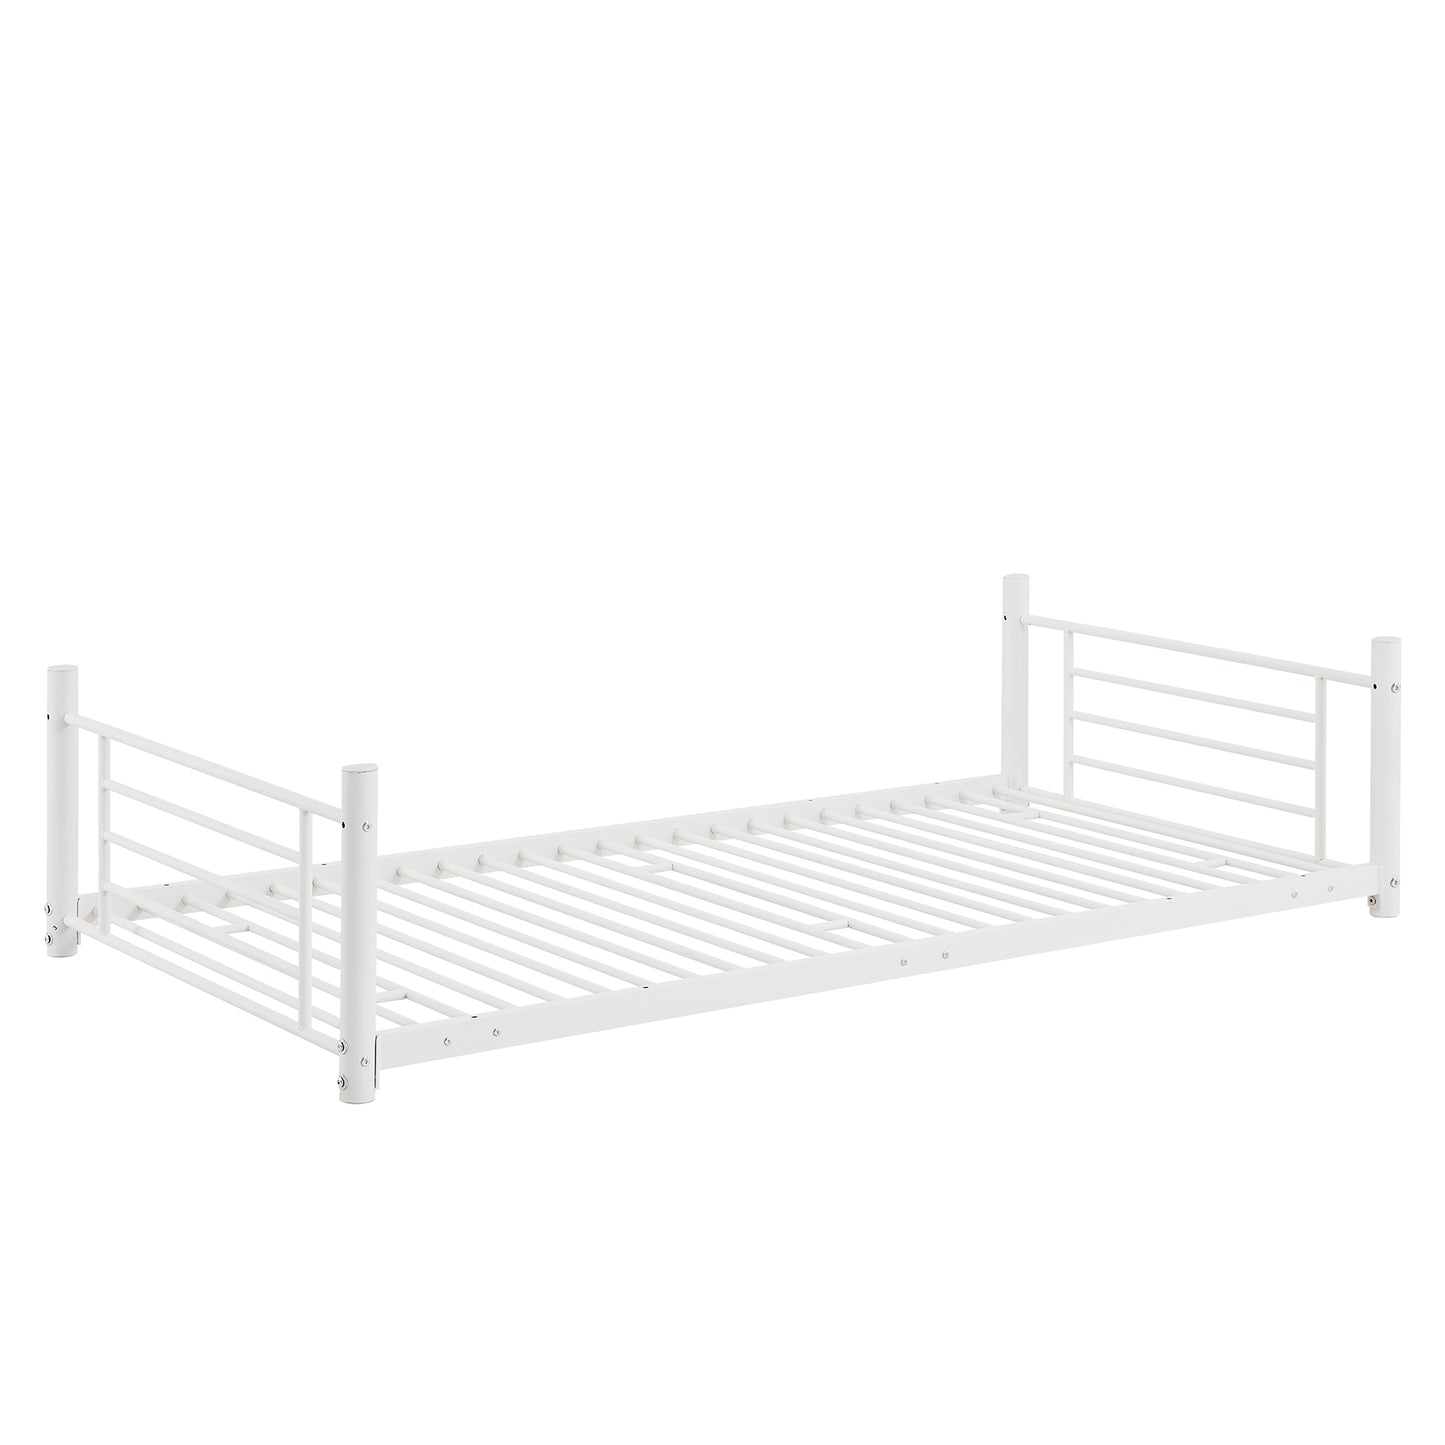 Twin-Twin-Twin Triple Bunk Bed with Built-in Ladder, Divided into 3 Separate Beds, White